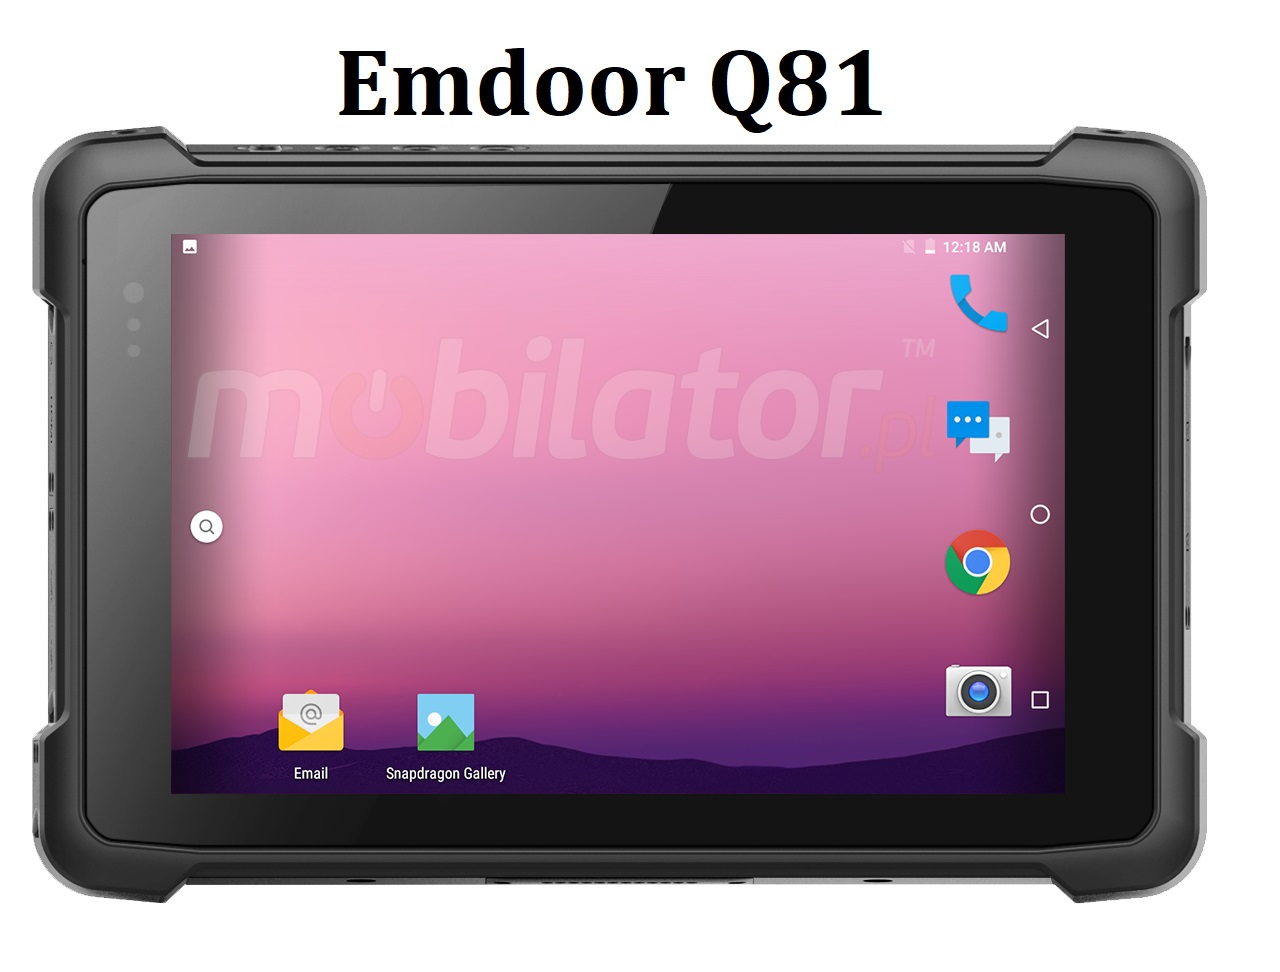 Rugged 8 inch tablet (IP65 + MIL-STD-810G) with NFC, 4GB RAM, 64GB ROM, Bluetooth 4.1, NFC and 1D MOTO SE655 code scanner - Emdoor Q81 v.2 